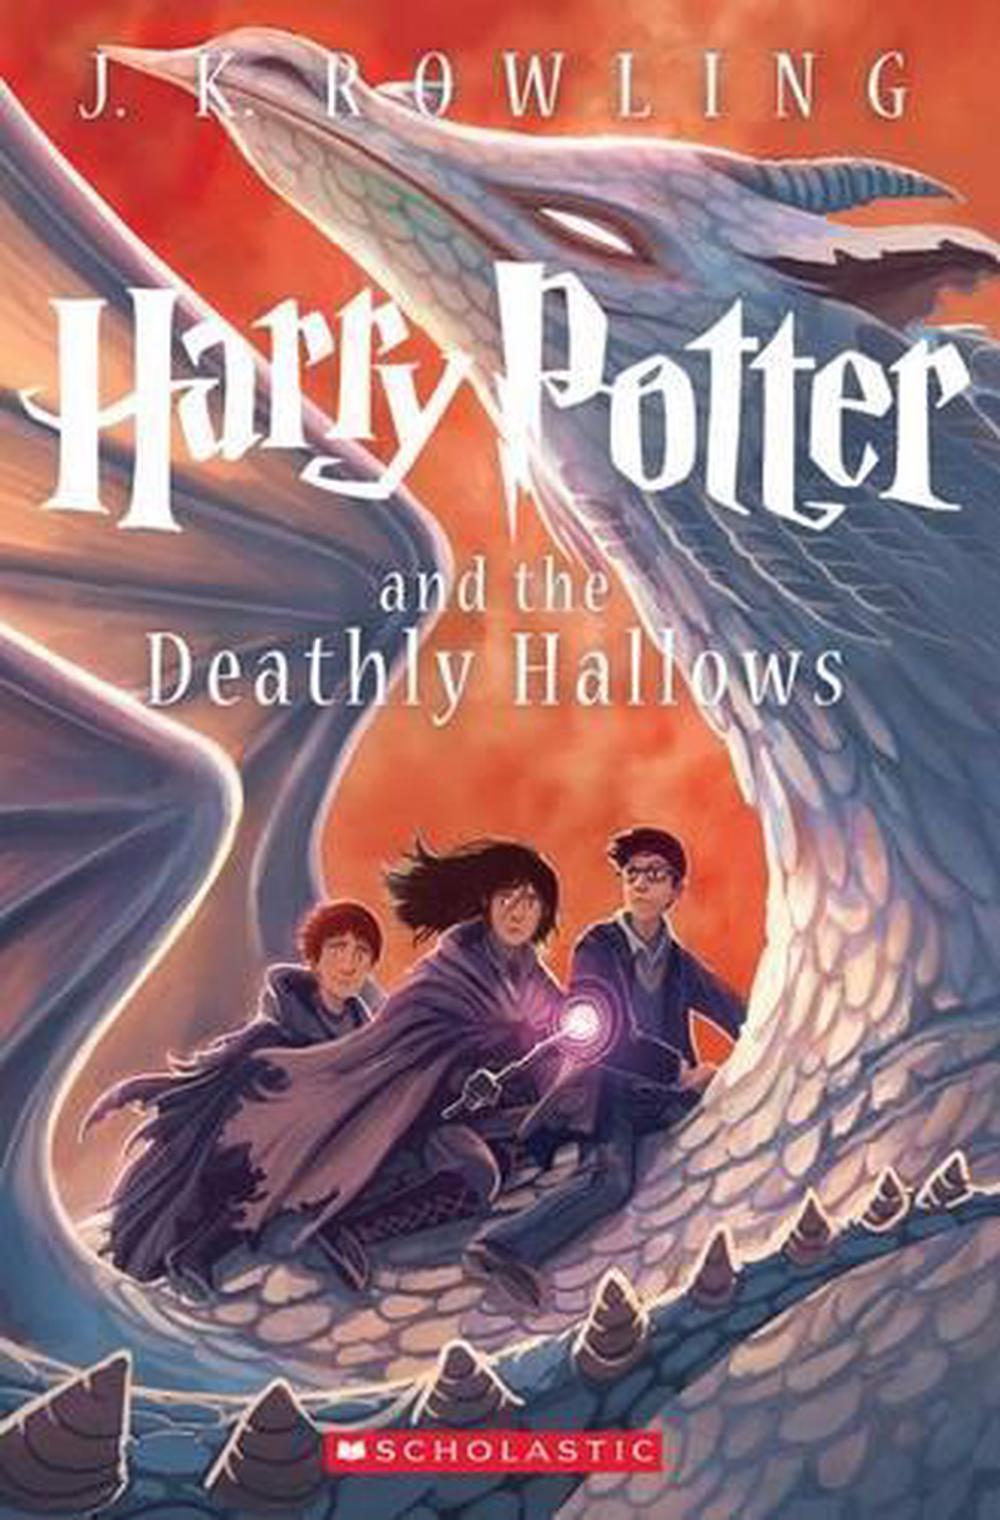 Harry Potter and the deathly hallows.